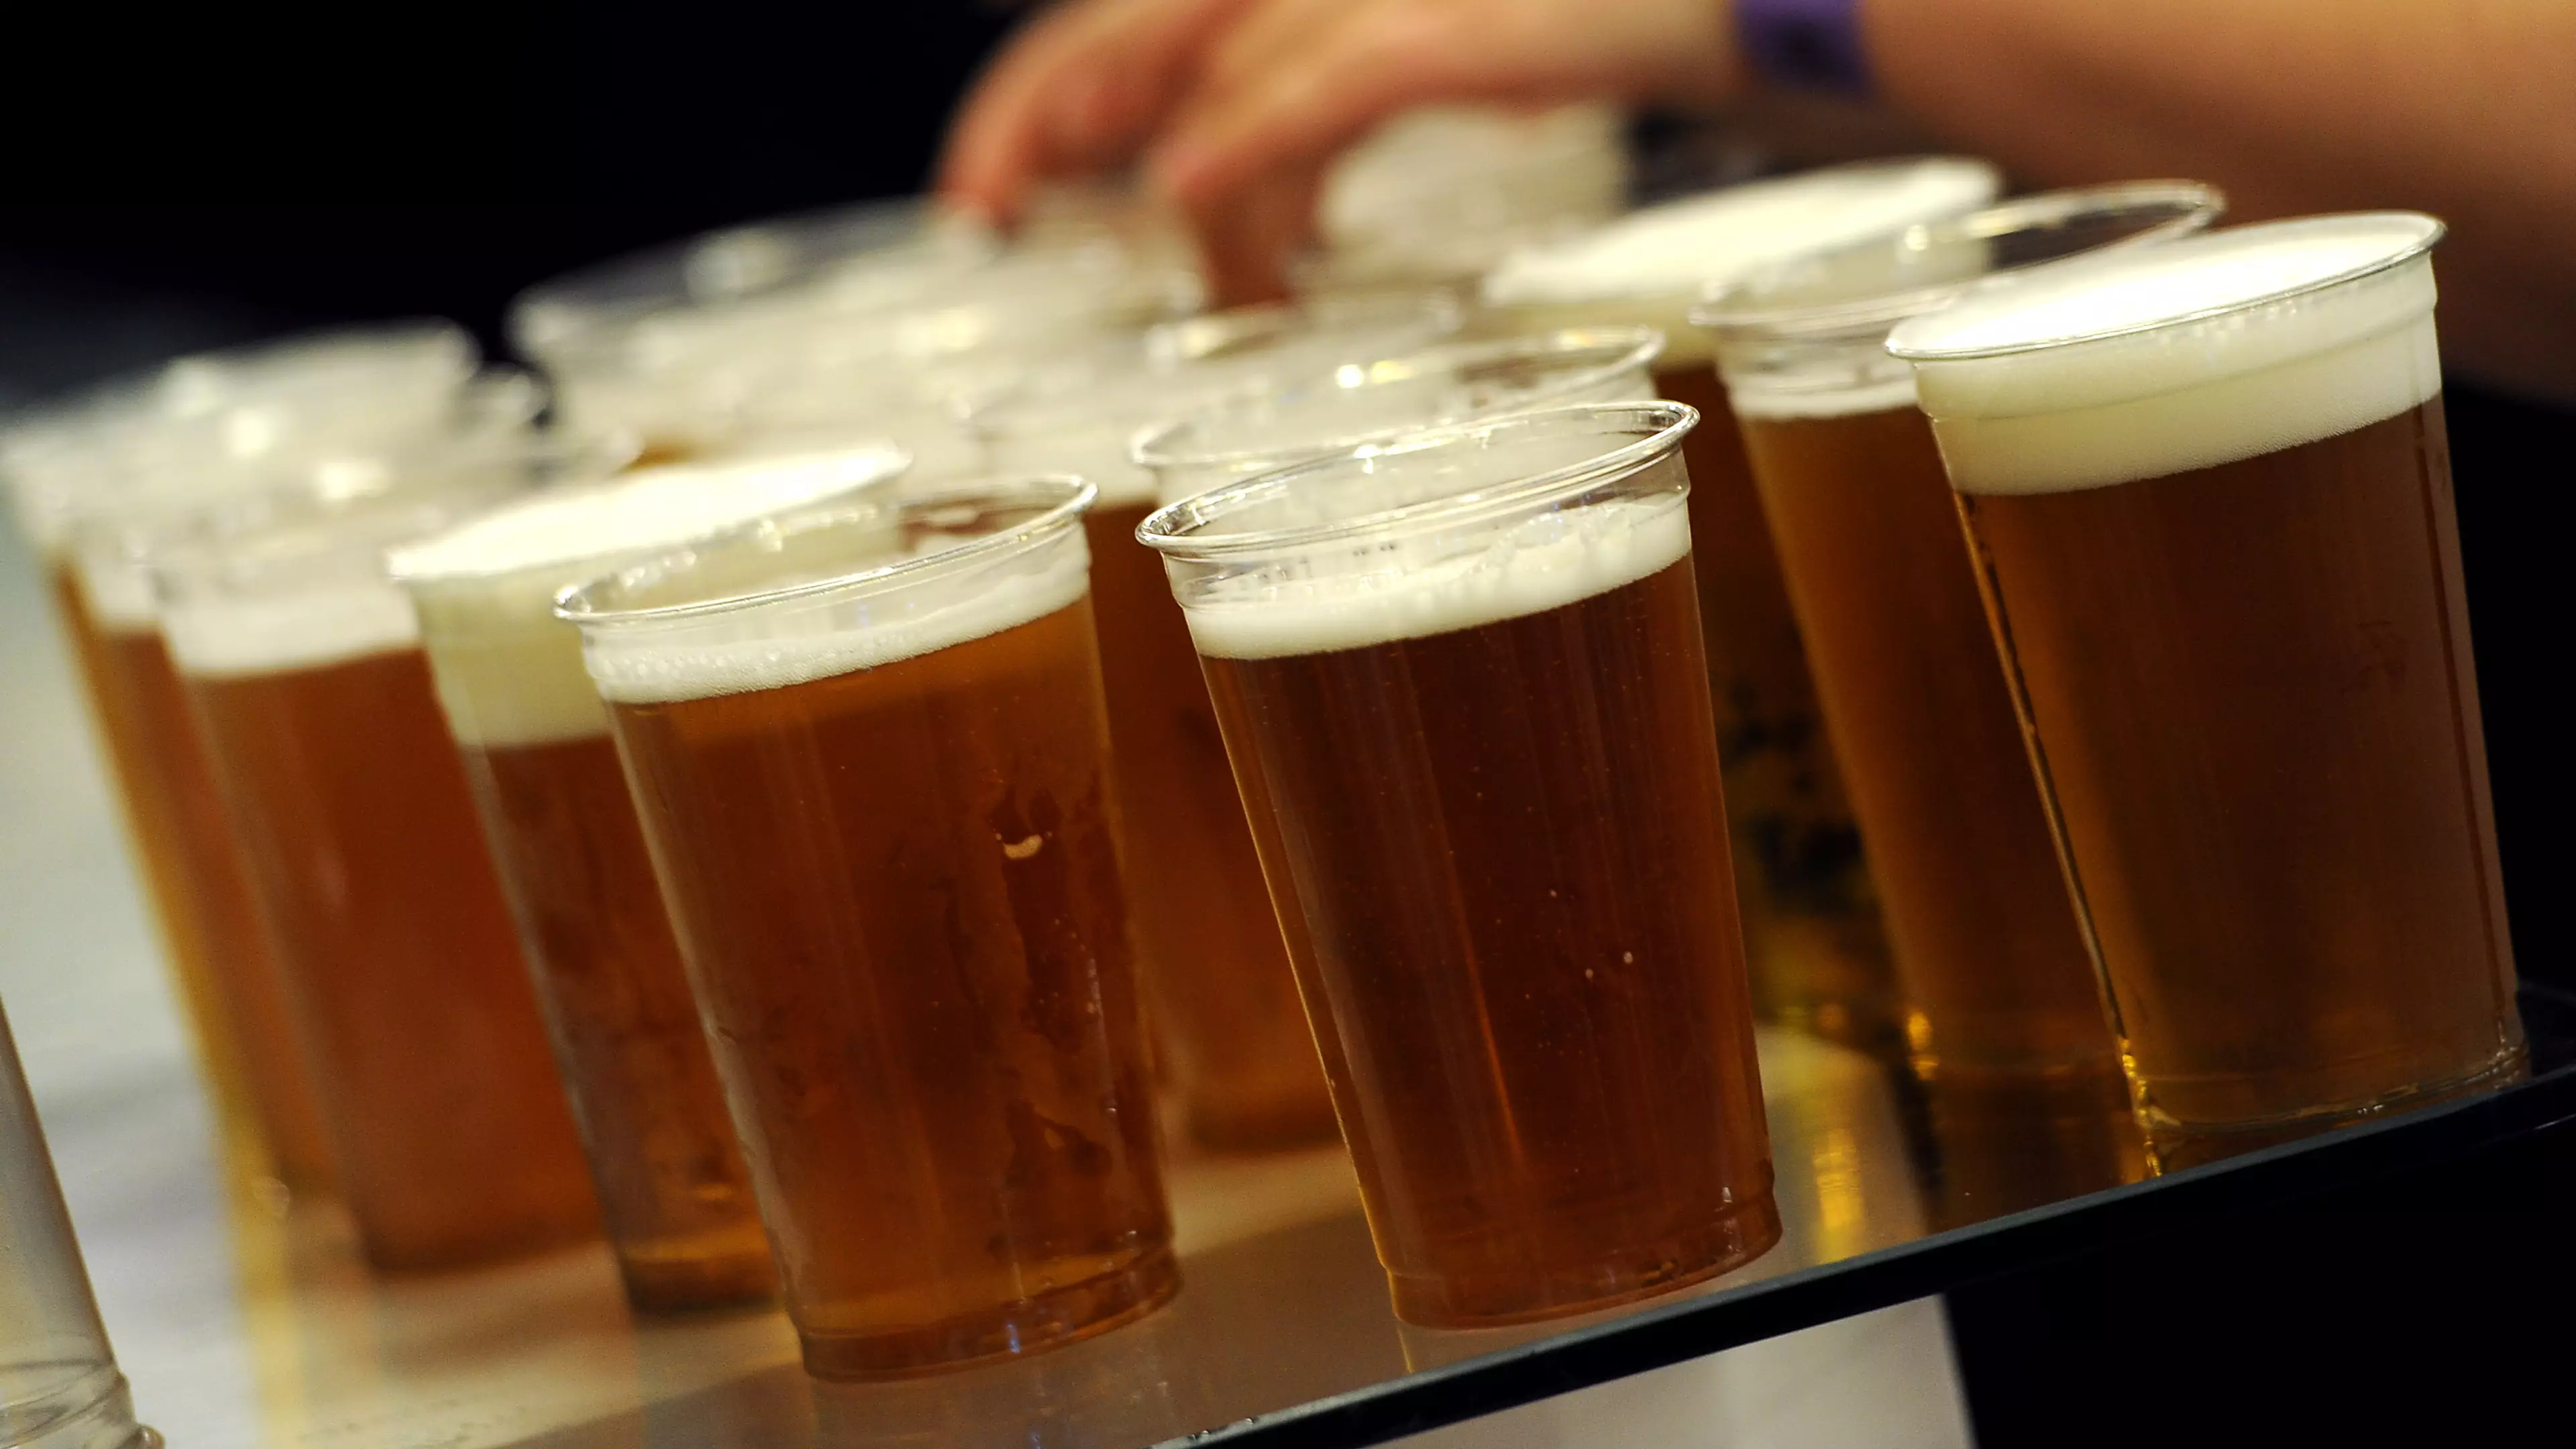 Every Brit 'Needs To Drink 124 Pints' To Save The Nation's Pubs After Lockdown